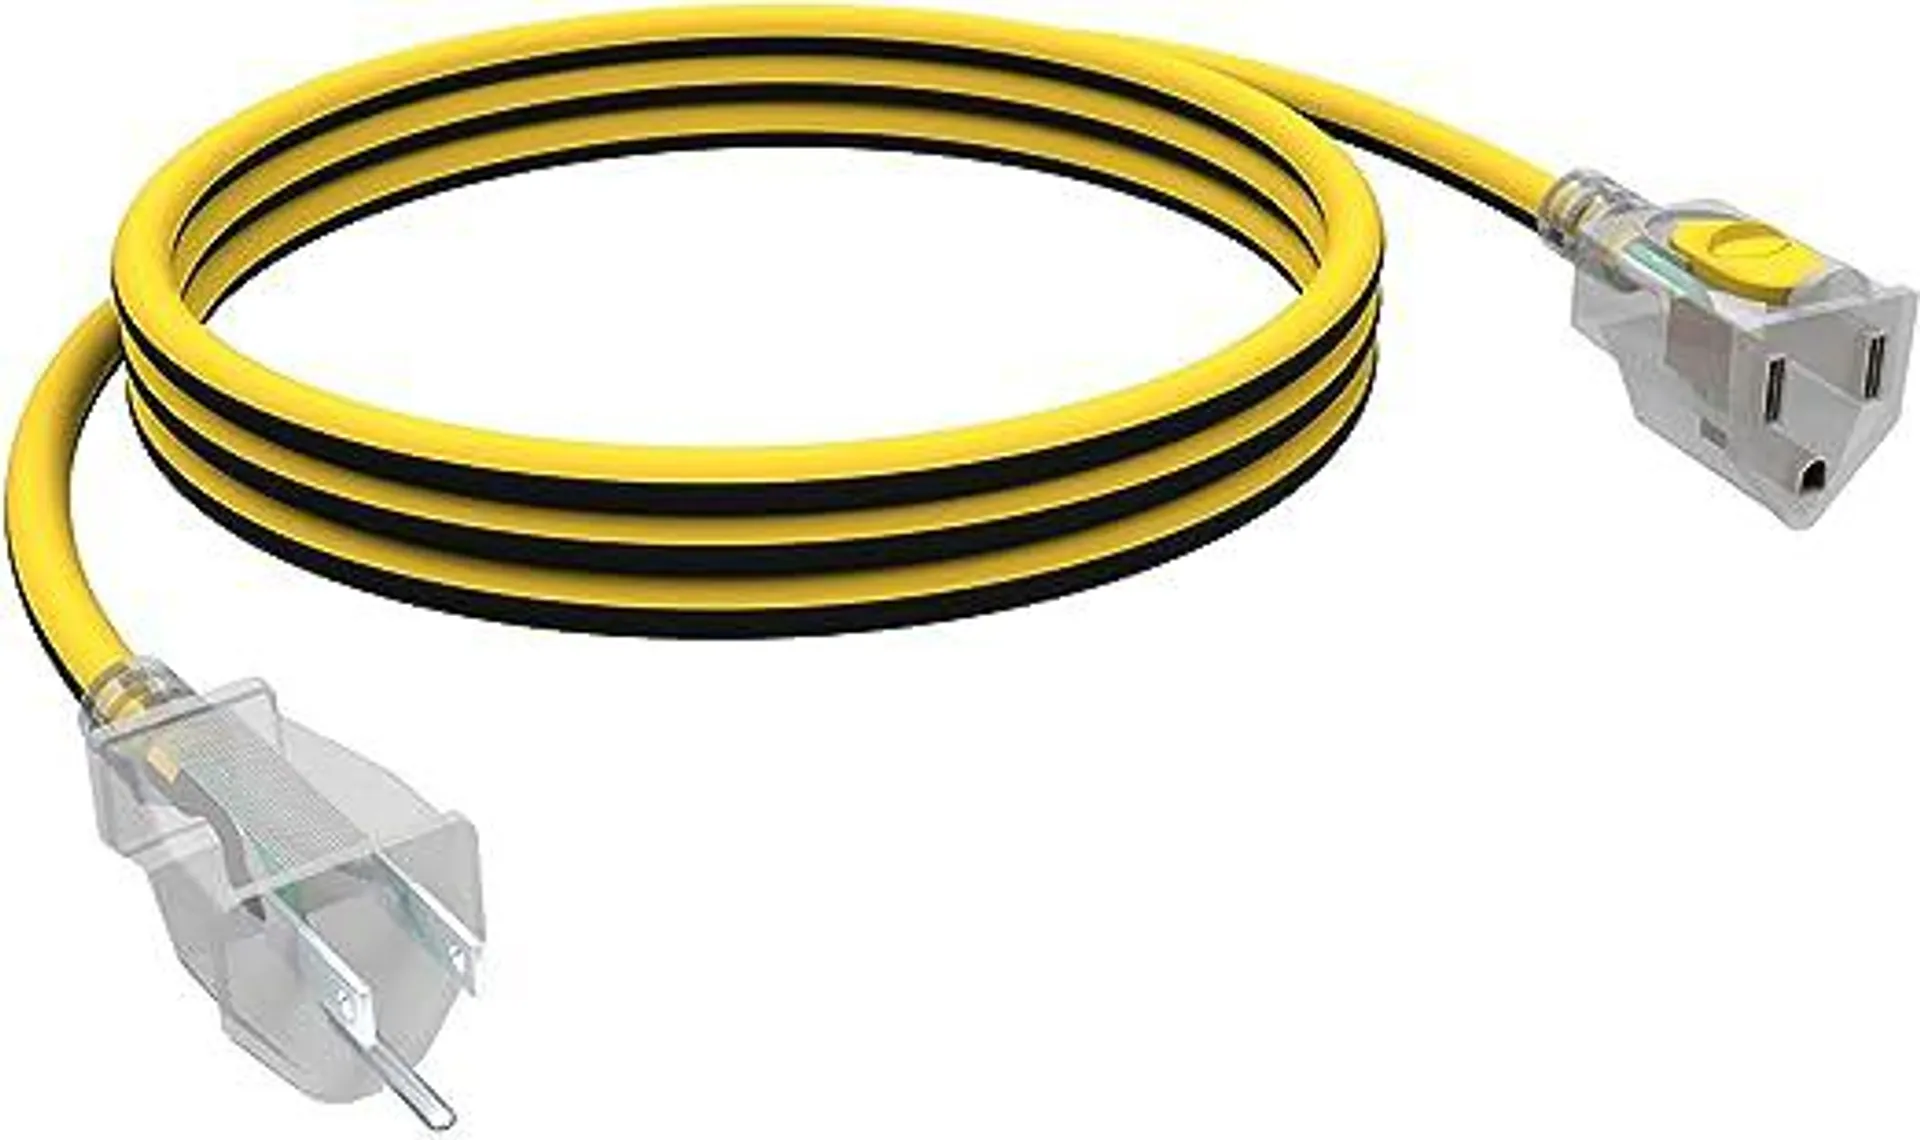 STANLEY 36108 8 FT. Contractor Grade Heavy Duty Extension Cord, Yellow/Black